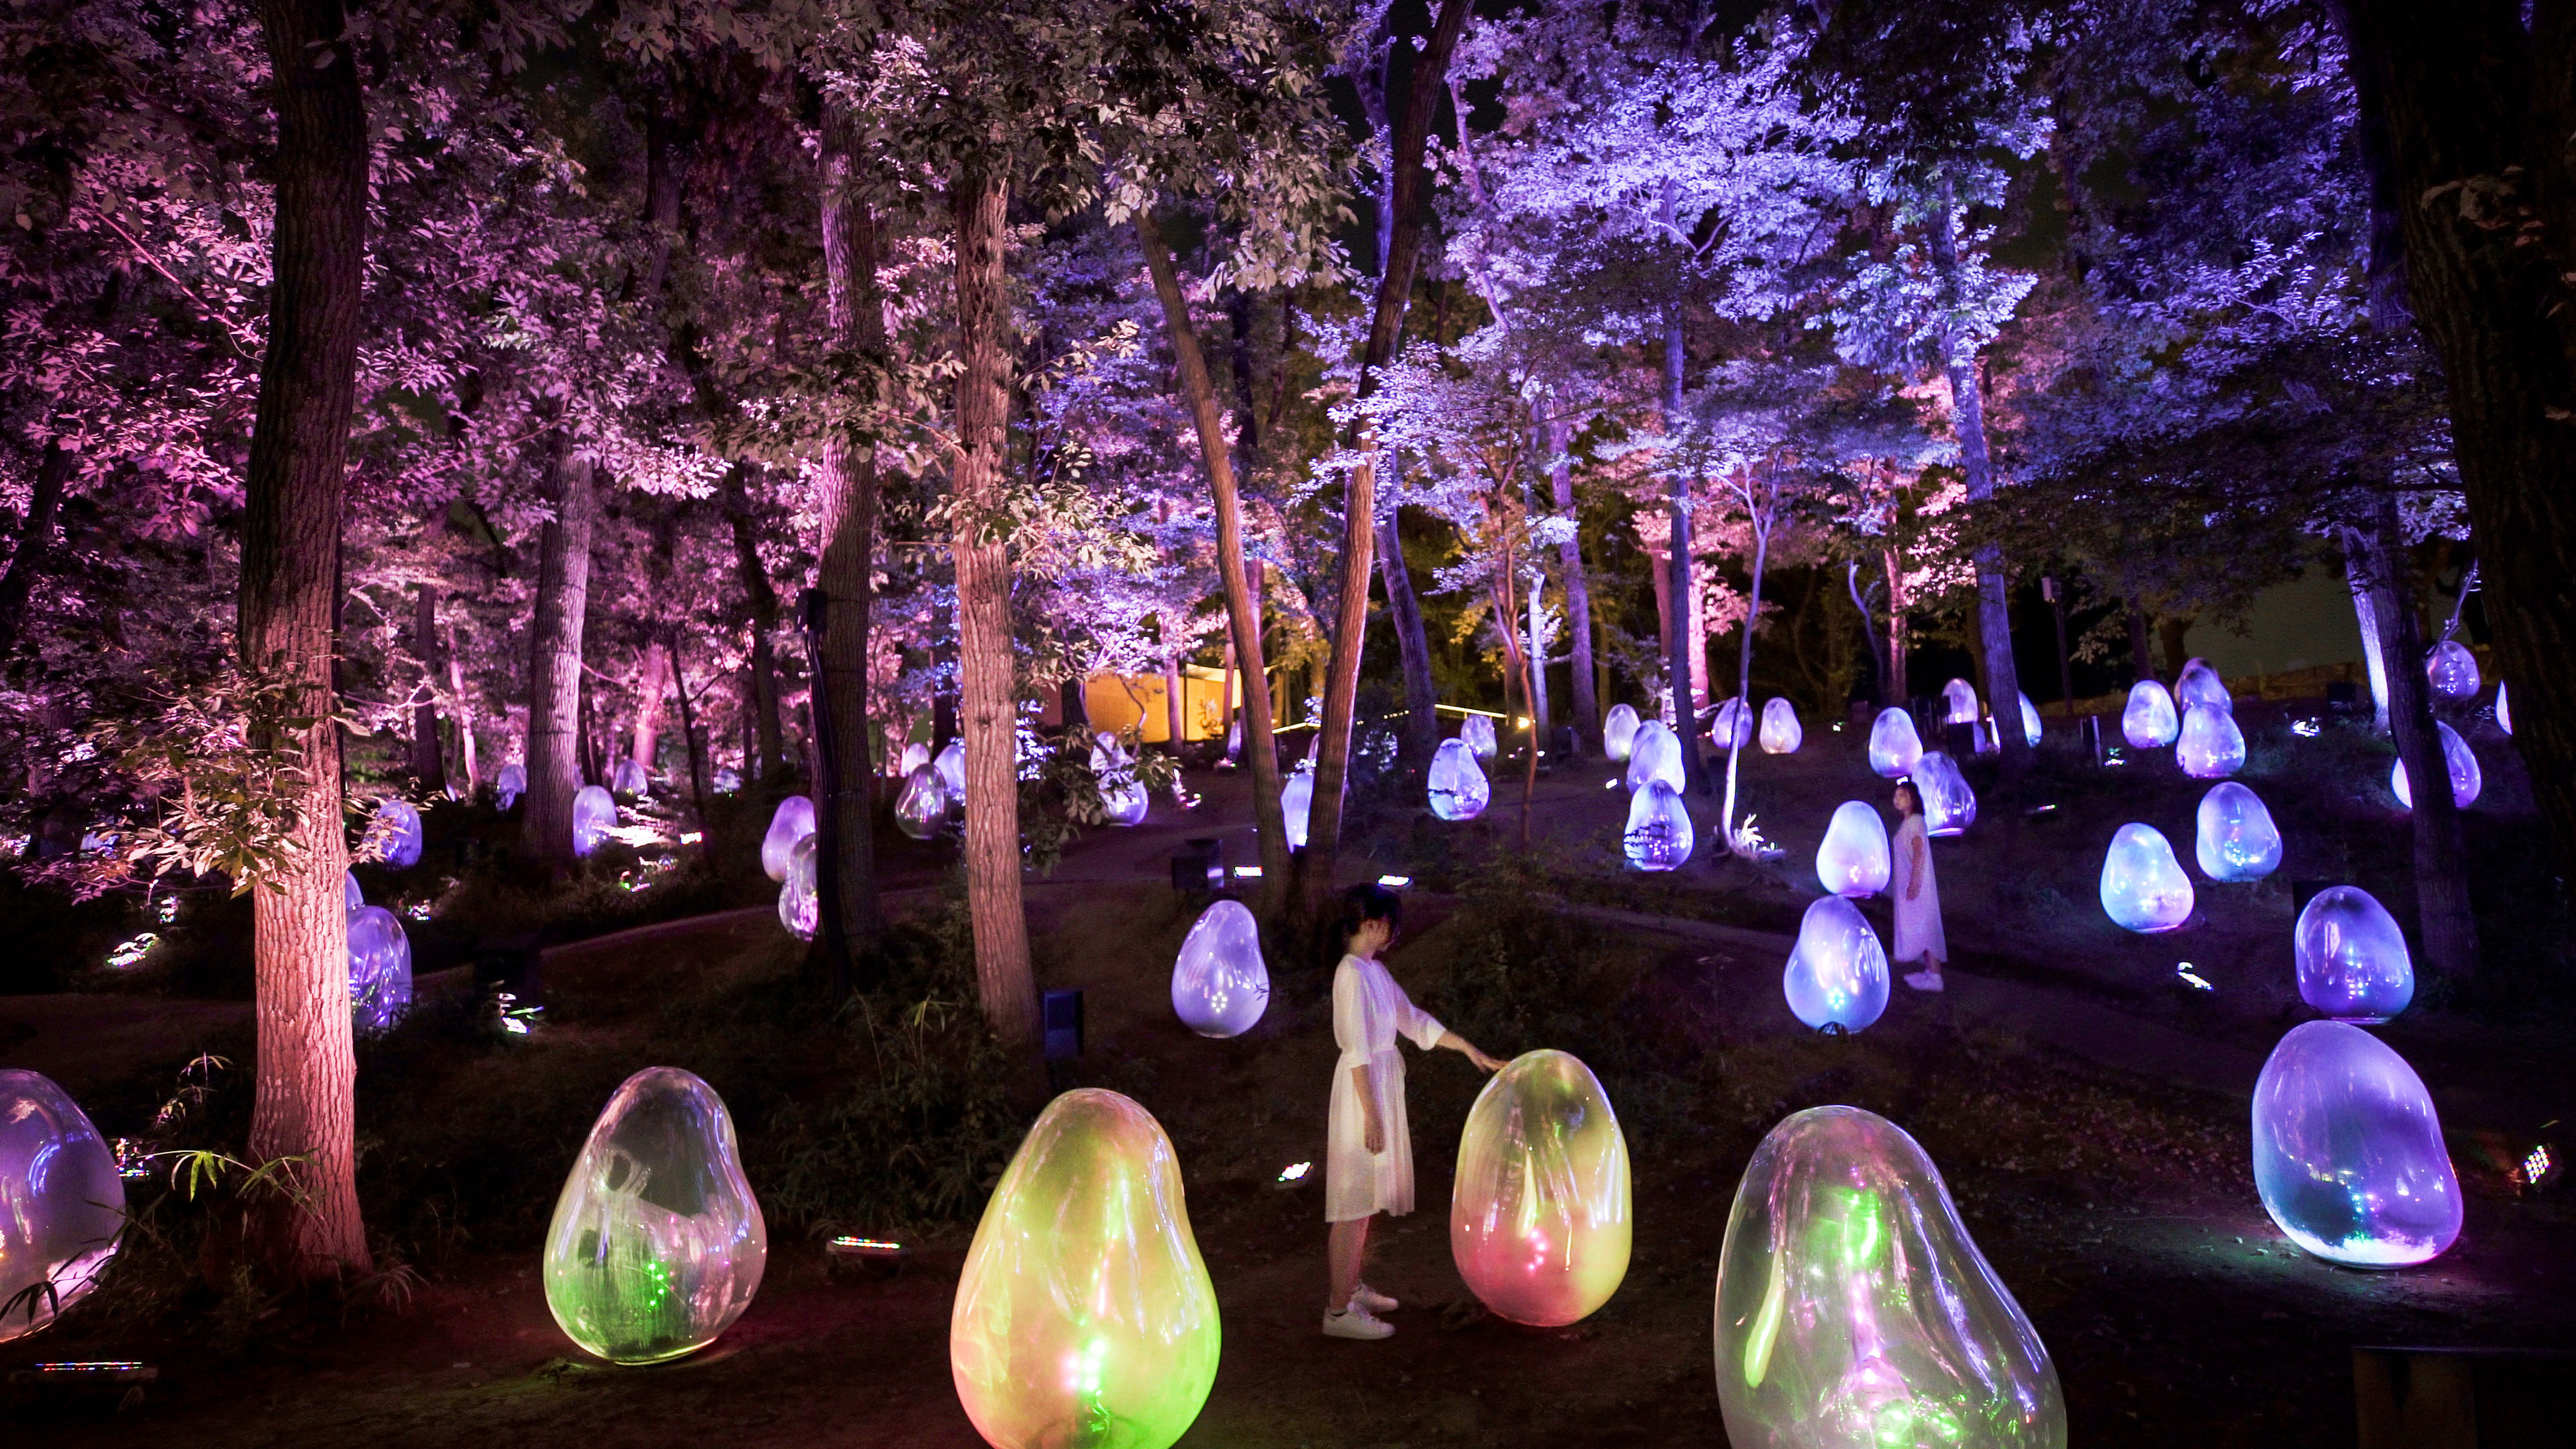 This forested park in Saitama has an outdoor teamLab exhibition